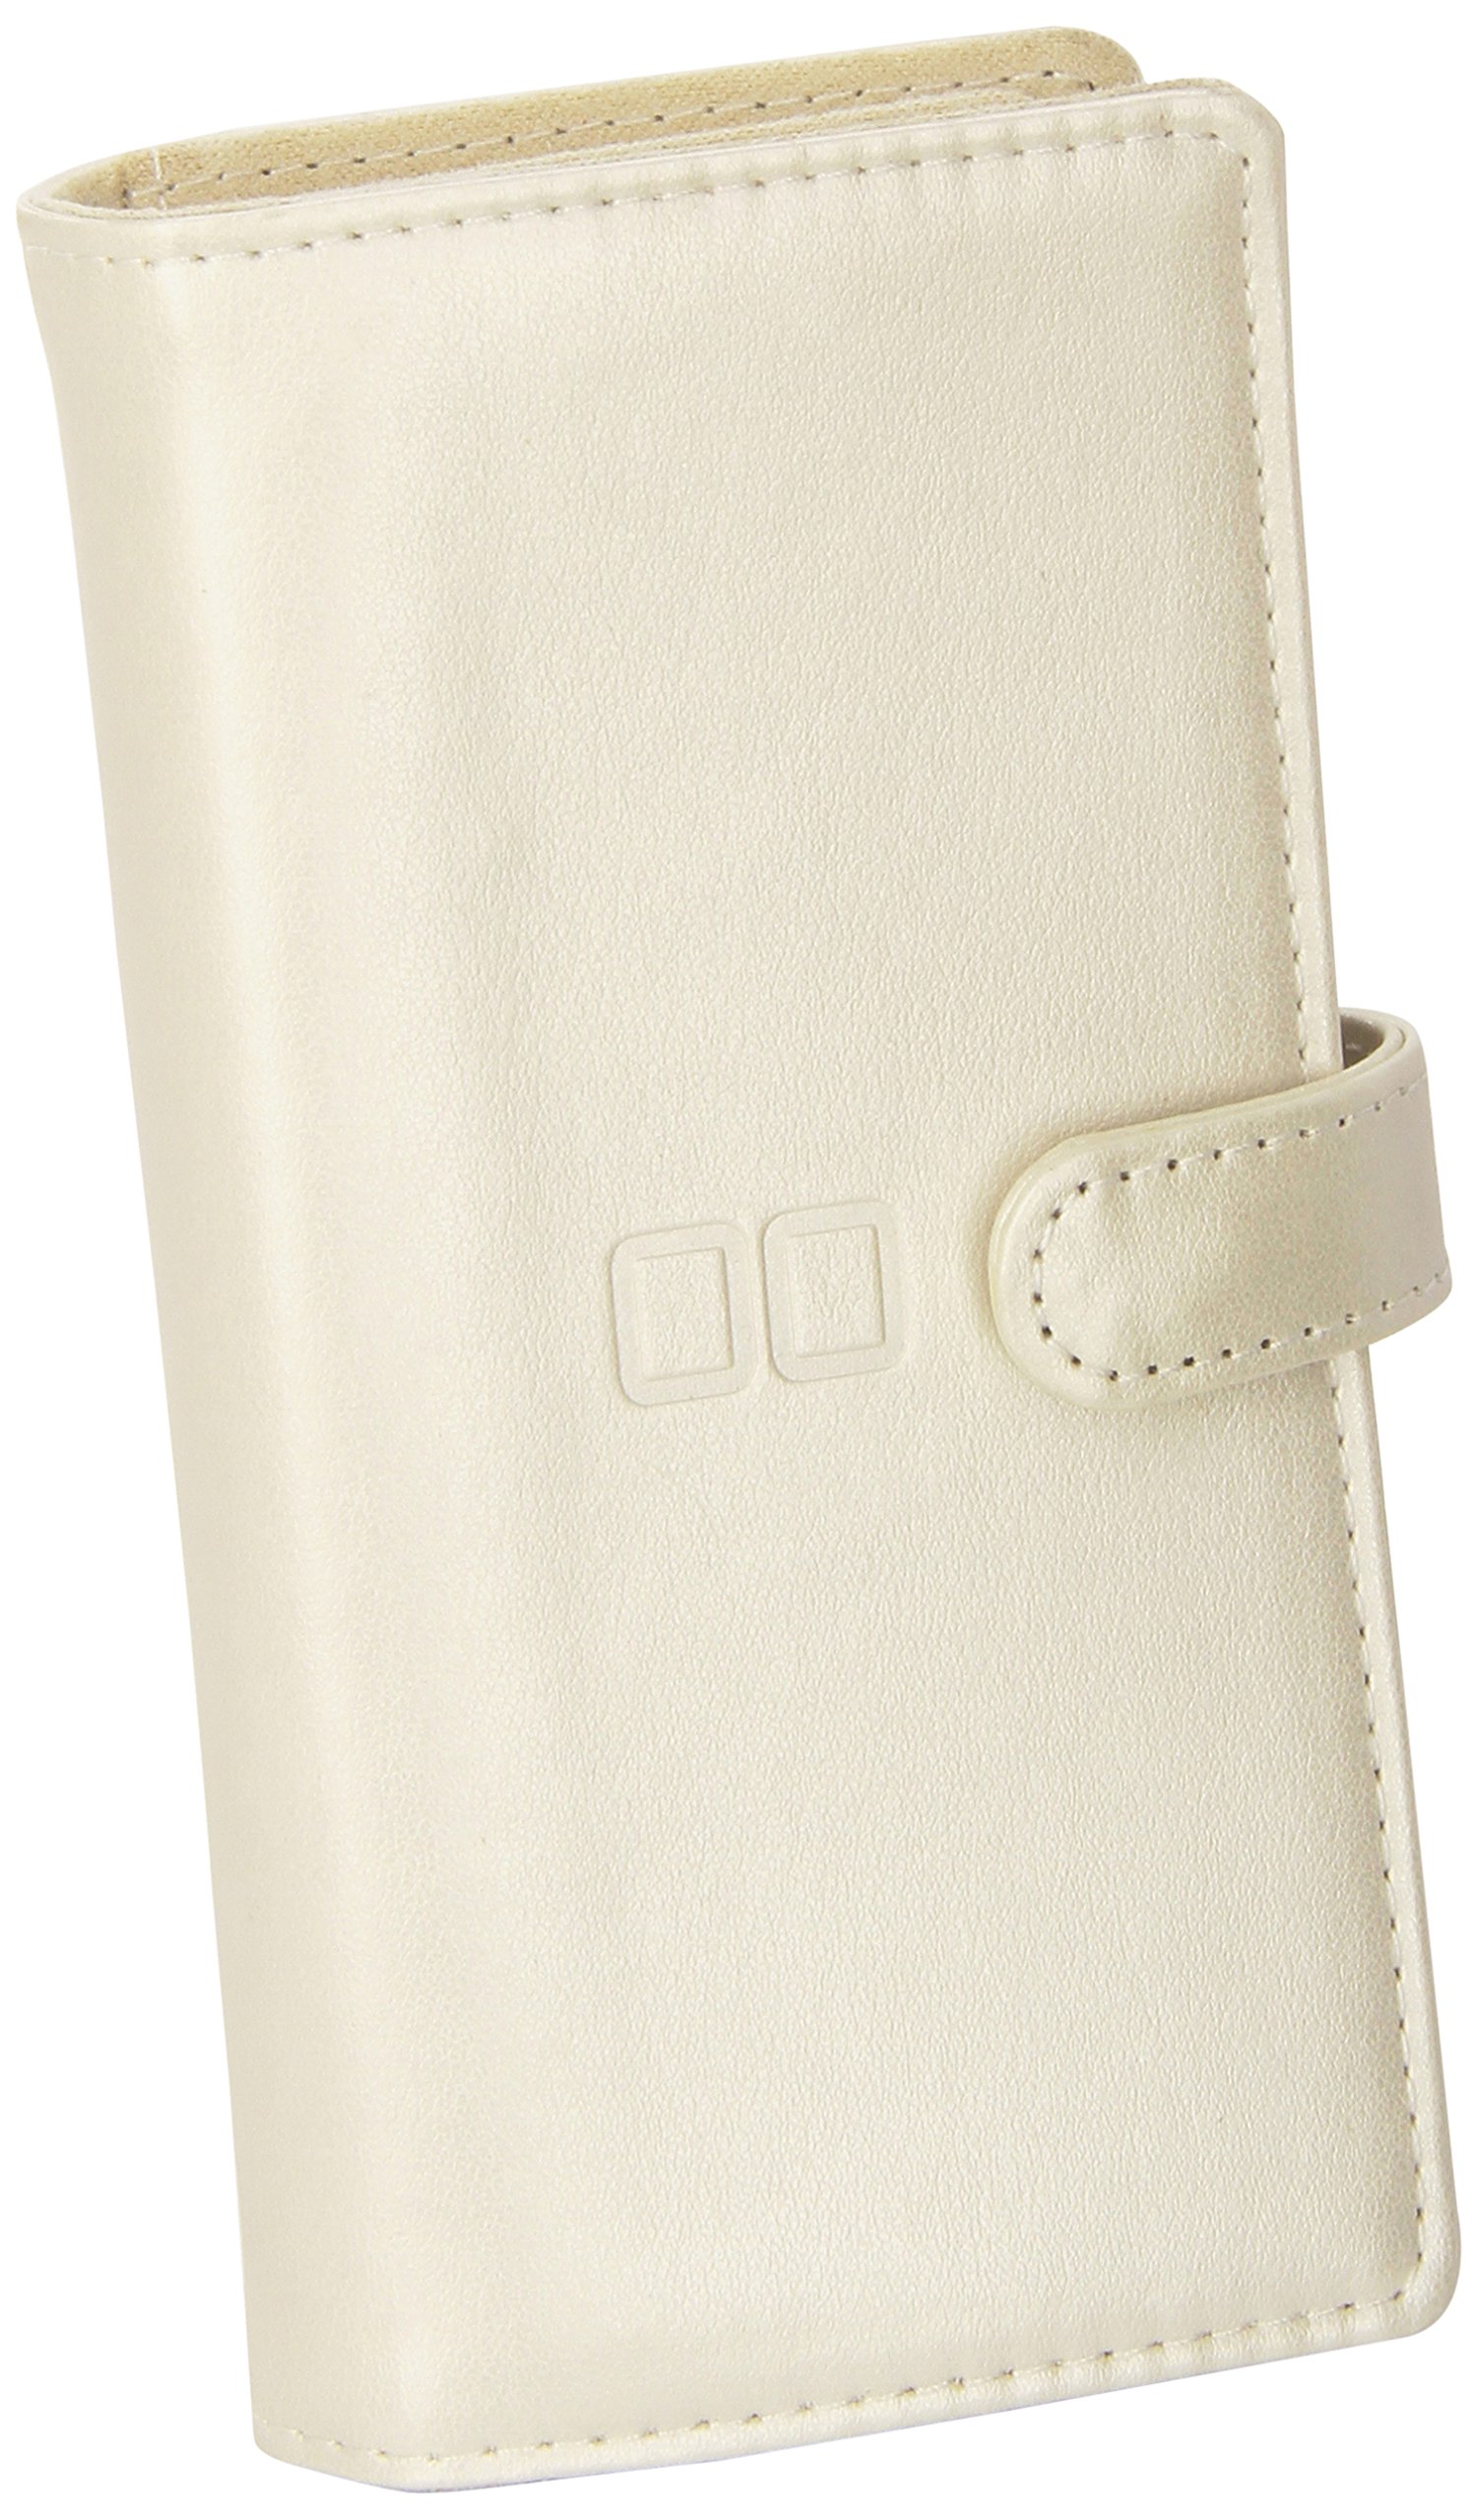 Nintendo DS Game Card Case Leather Type - White